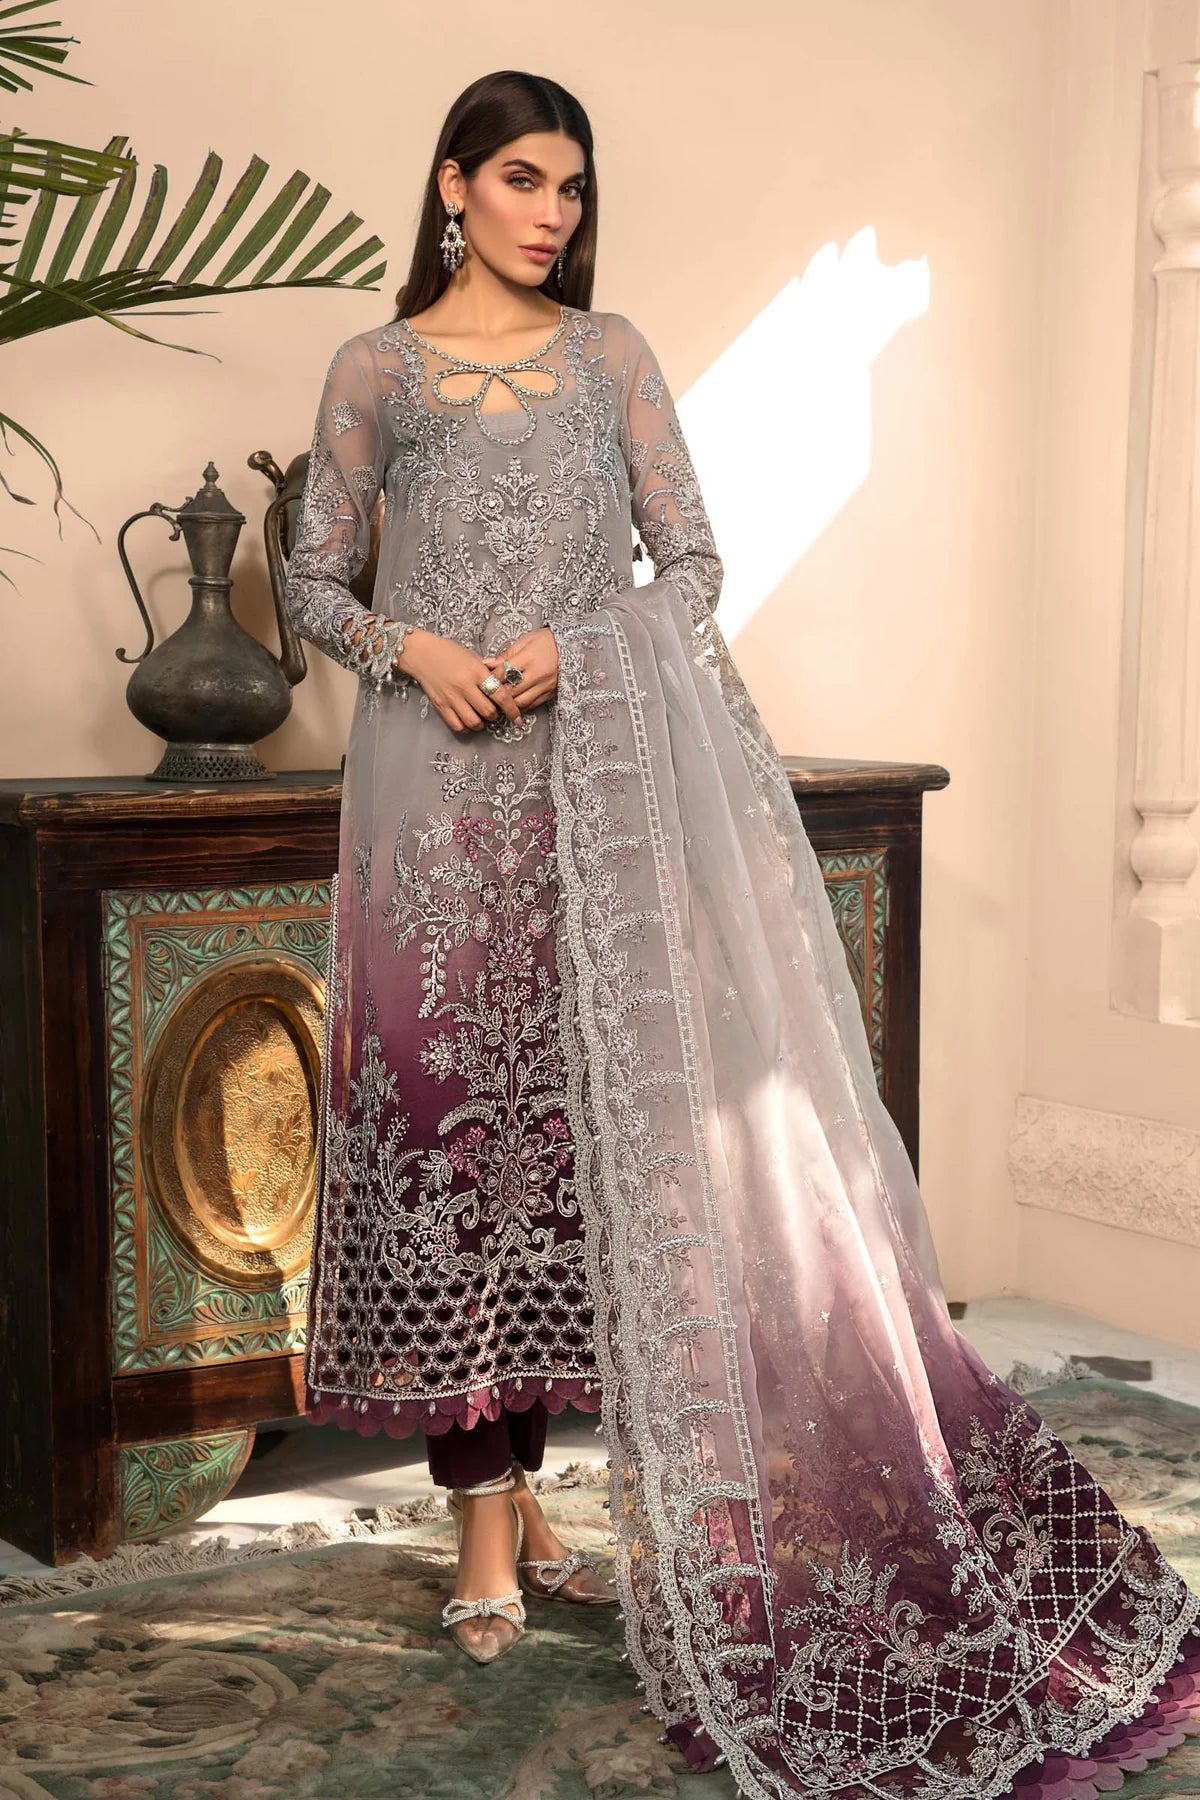 Maria B Inspired Mbroidered Plum 3 Piece Wedding Outfit - Desi Posh